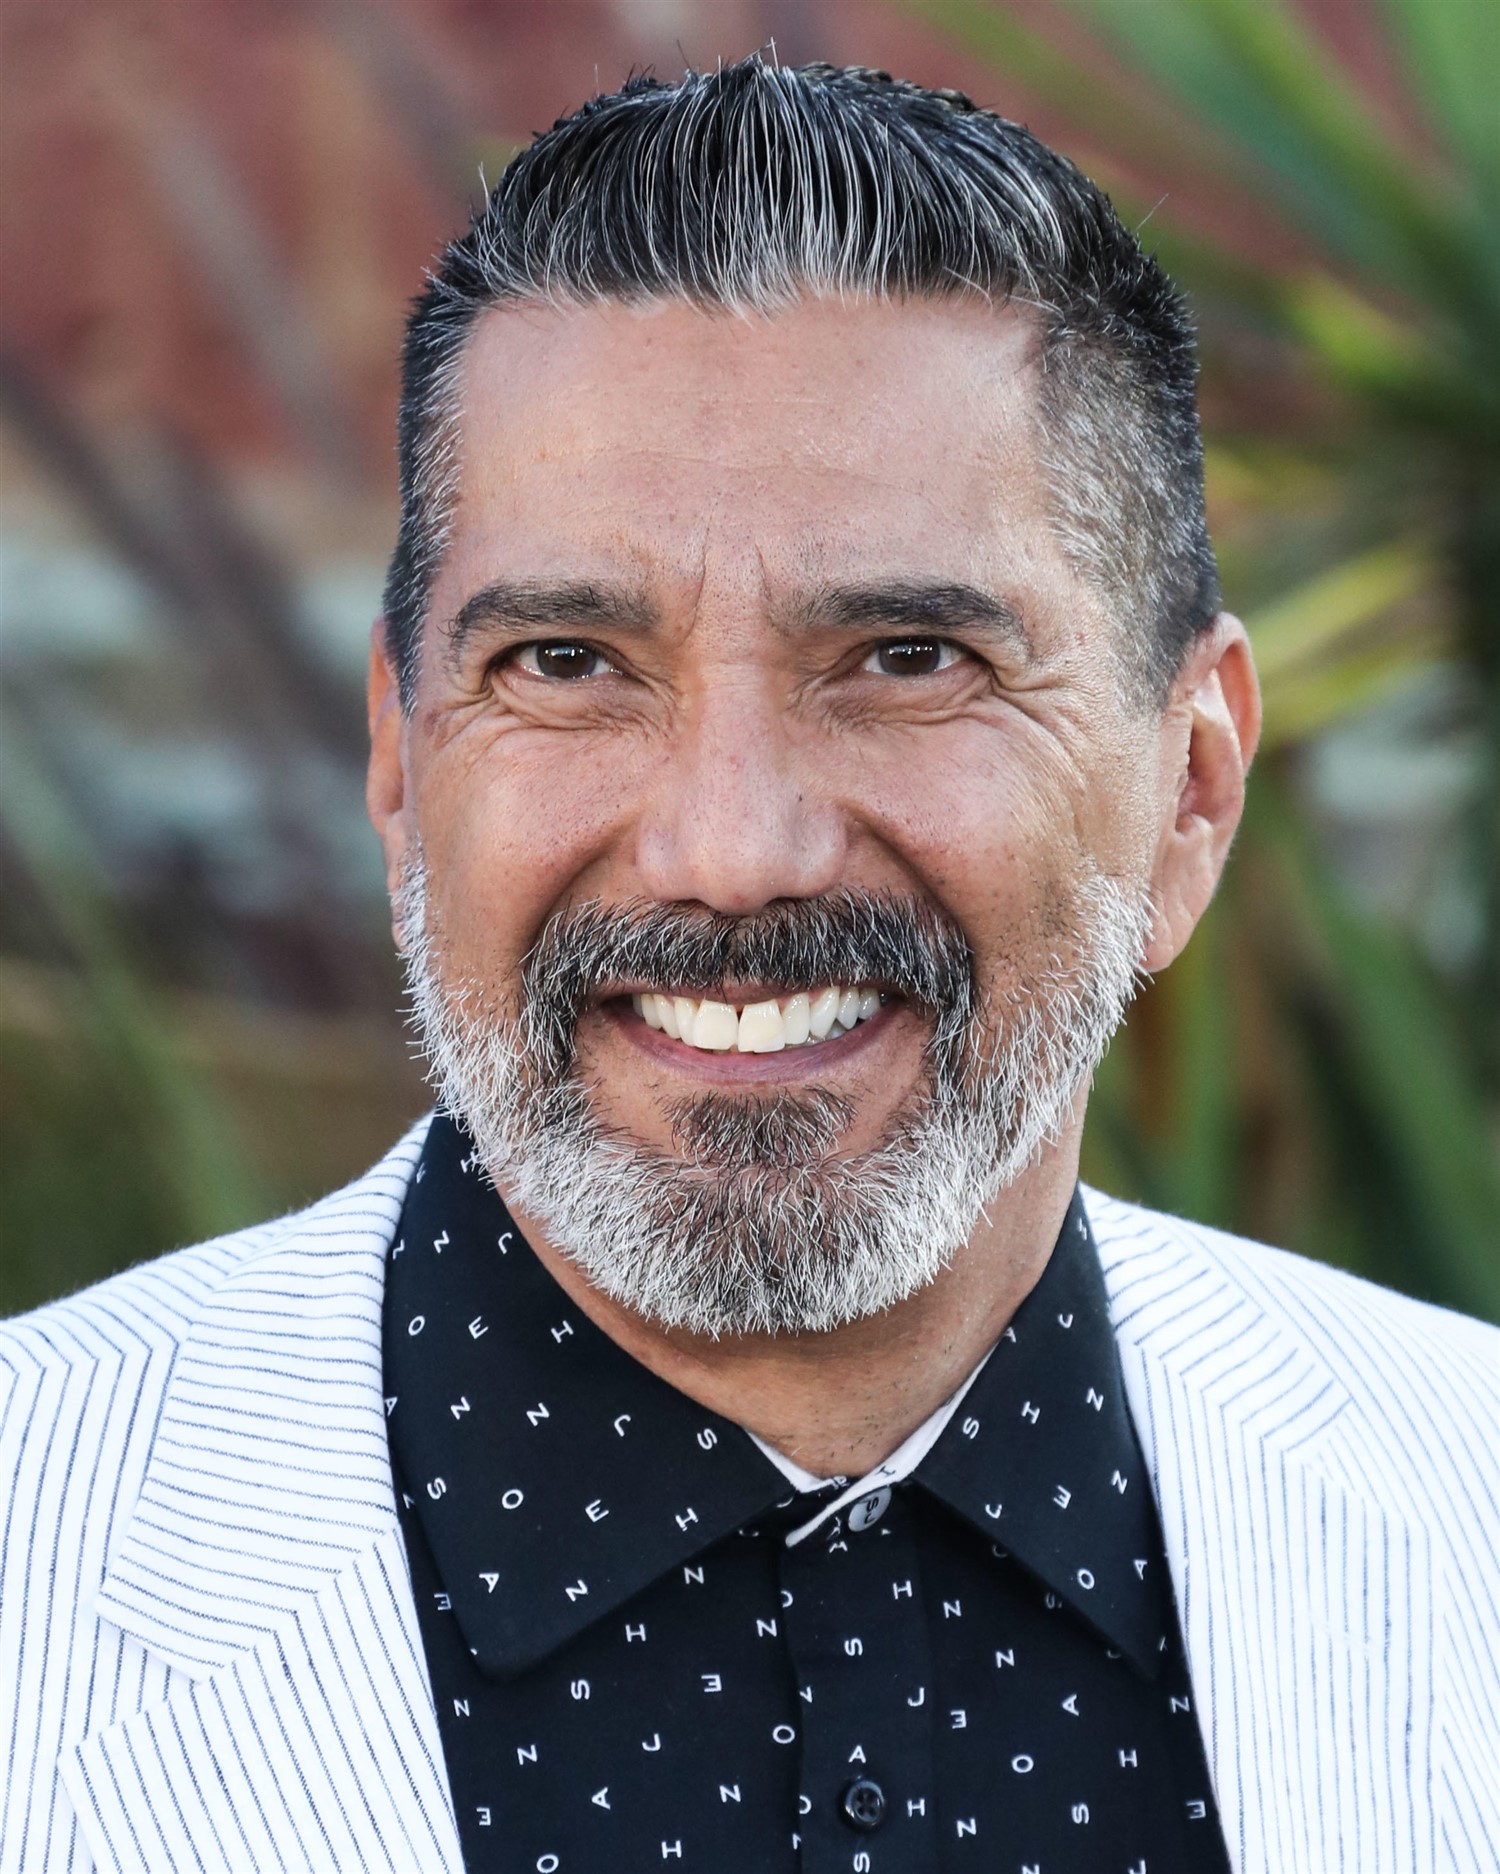 Steven Michael Quezada 7:20 Show Funny Stop Comedy Club on Sep 24, 19:20@Funny Stop Comedy Club - Buy tickets and Get information on Funny Stop funnystop.online